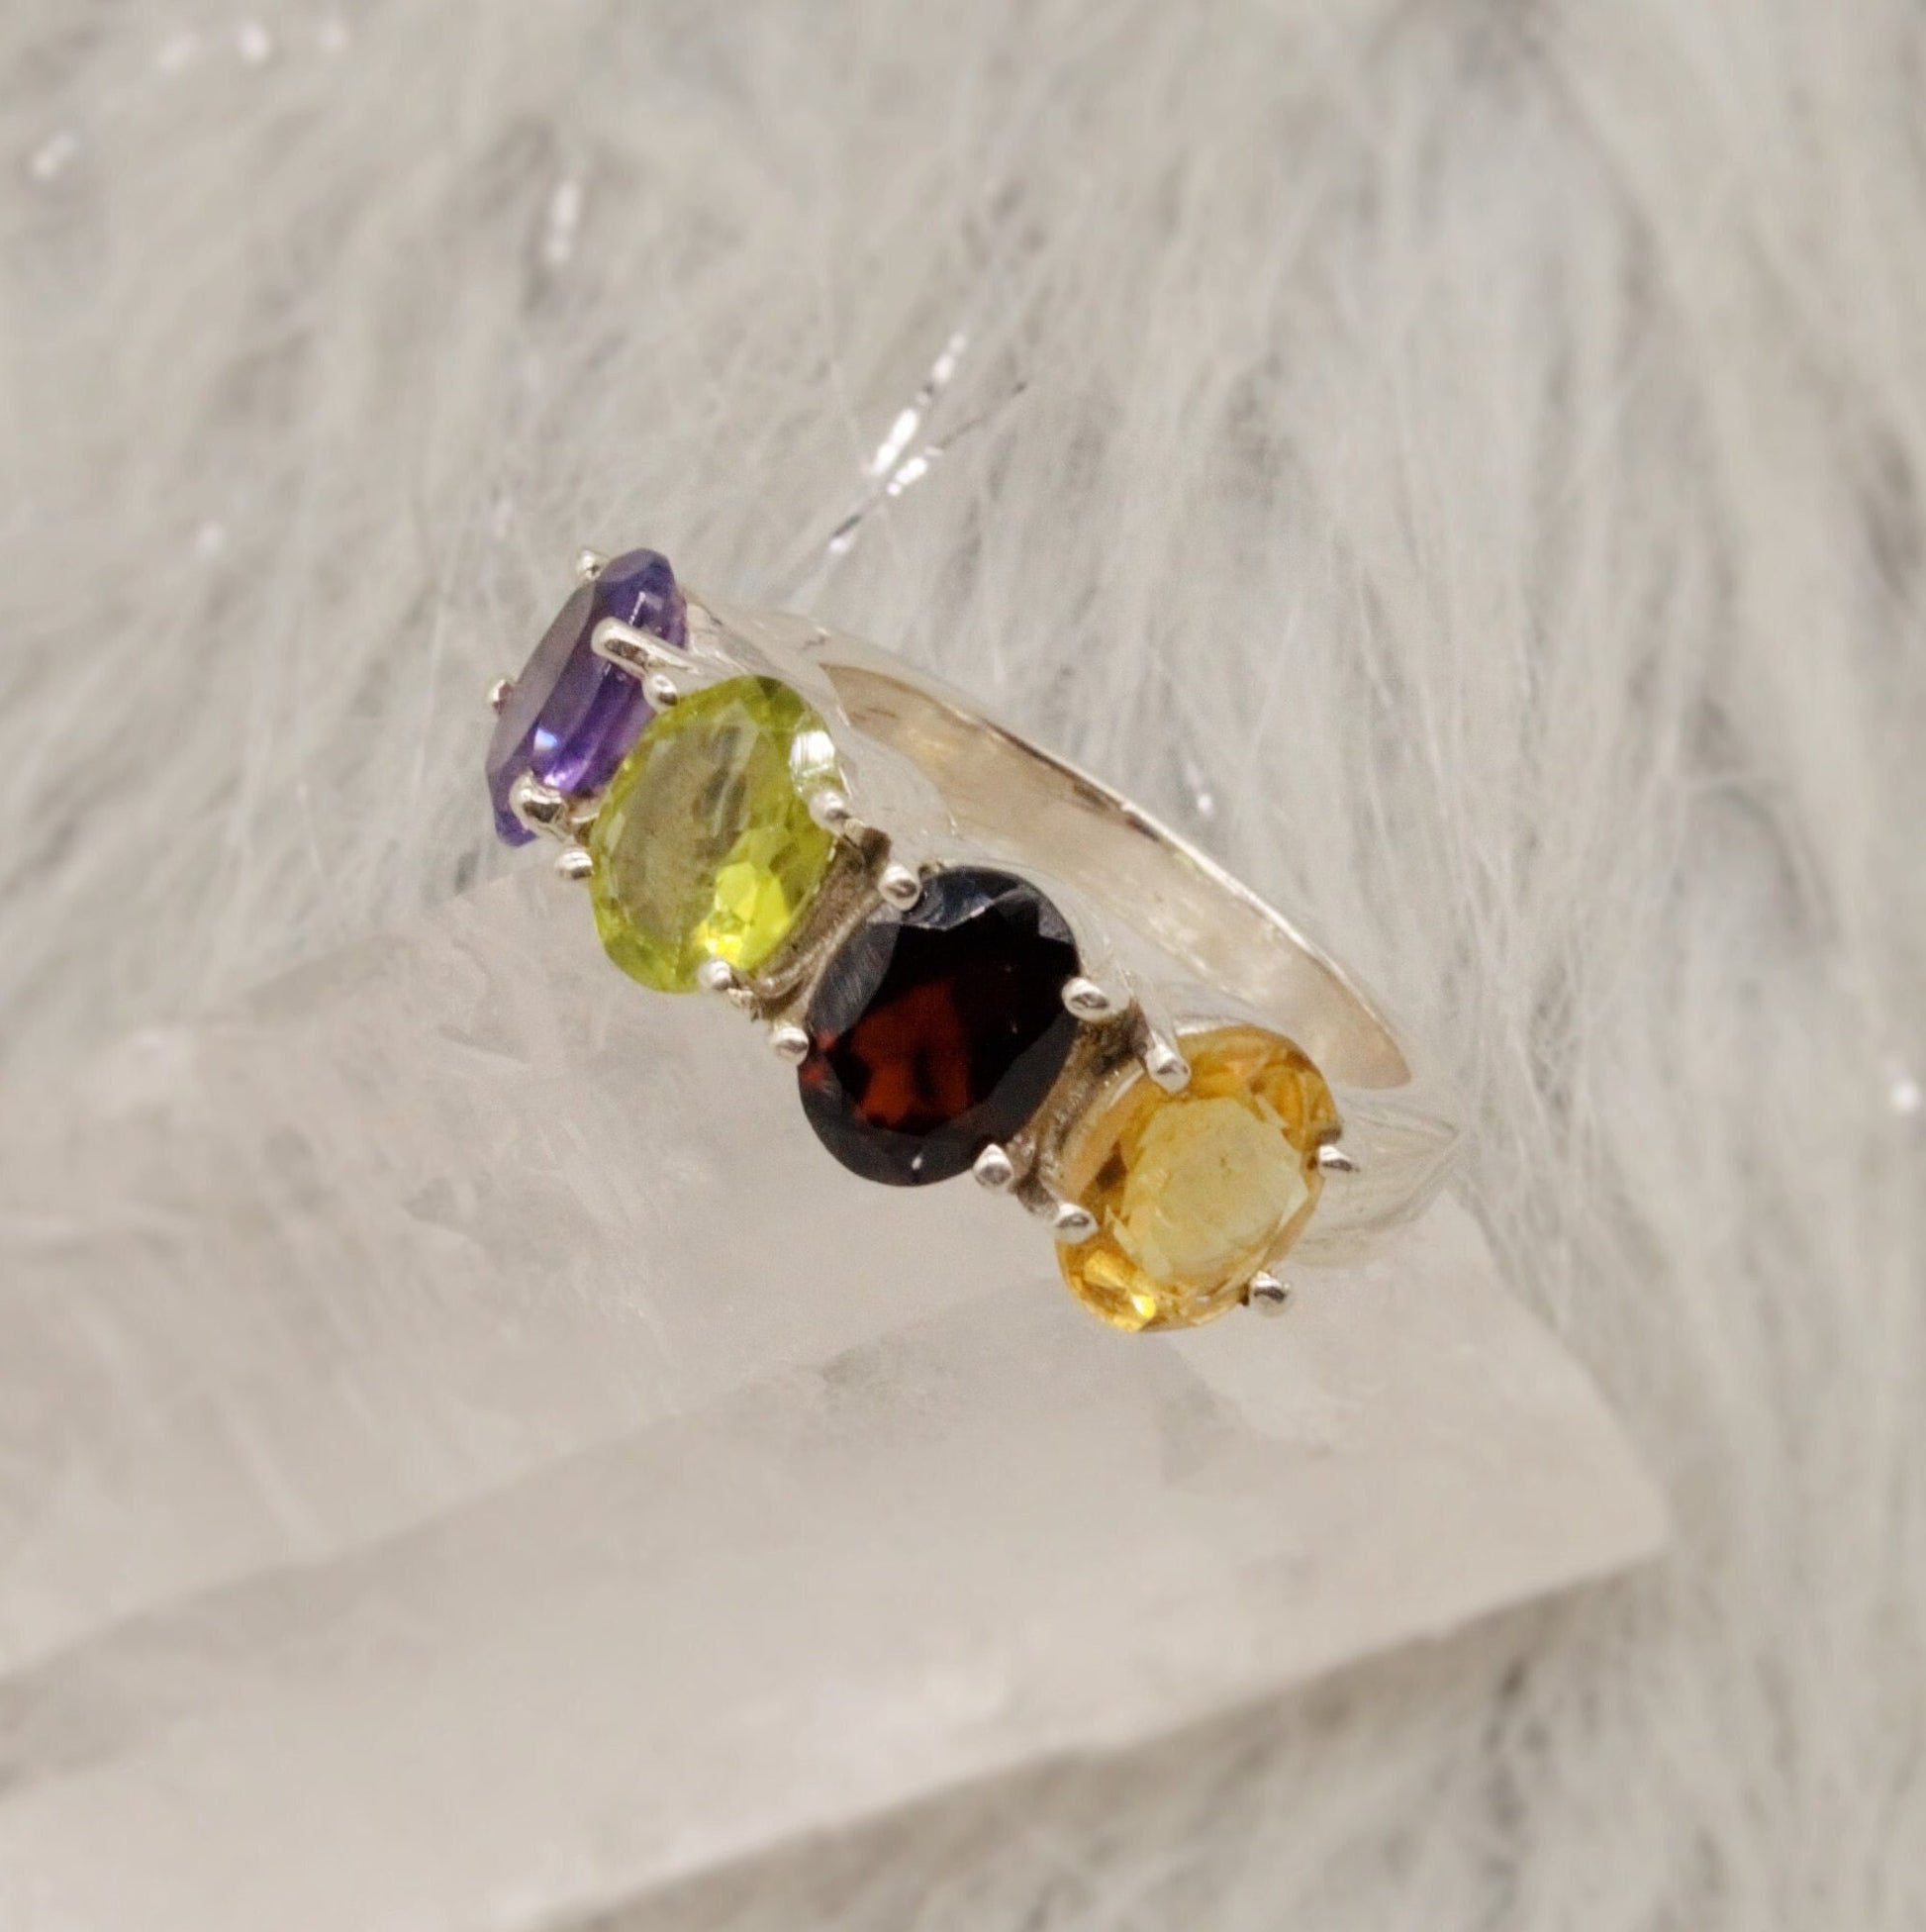 Sterling Silver Dainty Promise Ring, Stacking Ring, Amethyst, Peridot, Garnet, Citrine Jewelry, Gemstone Ring, Gifts for her, Handmade ring